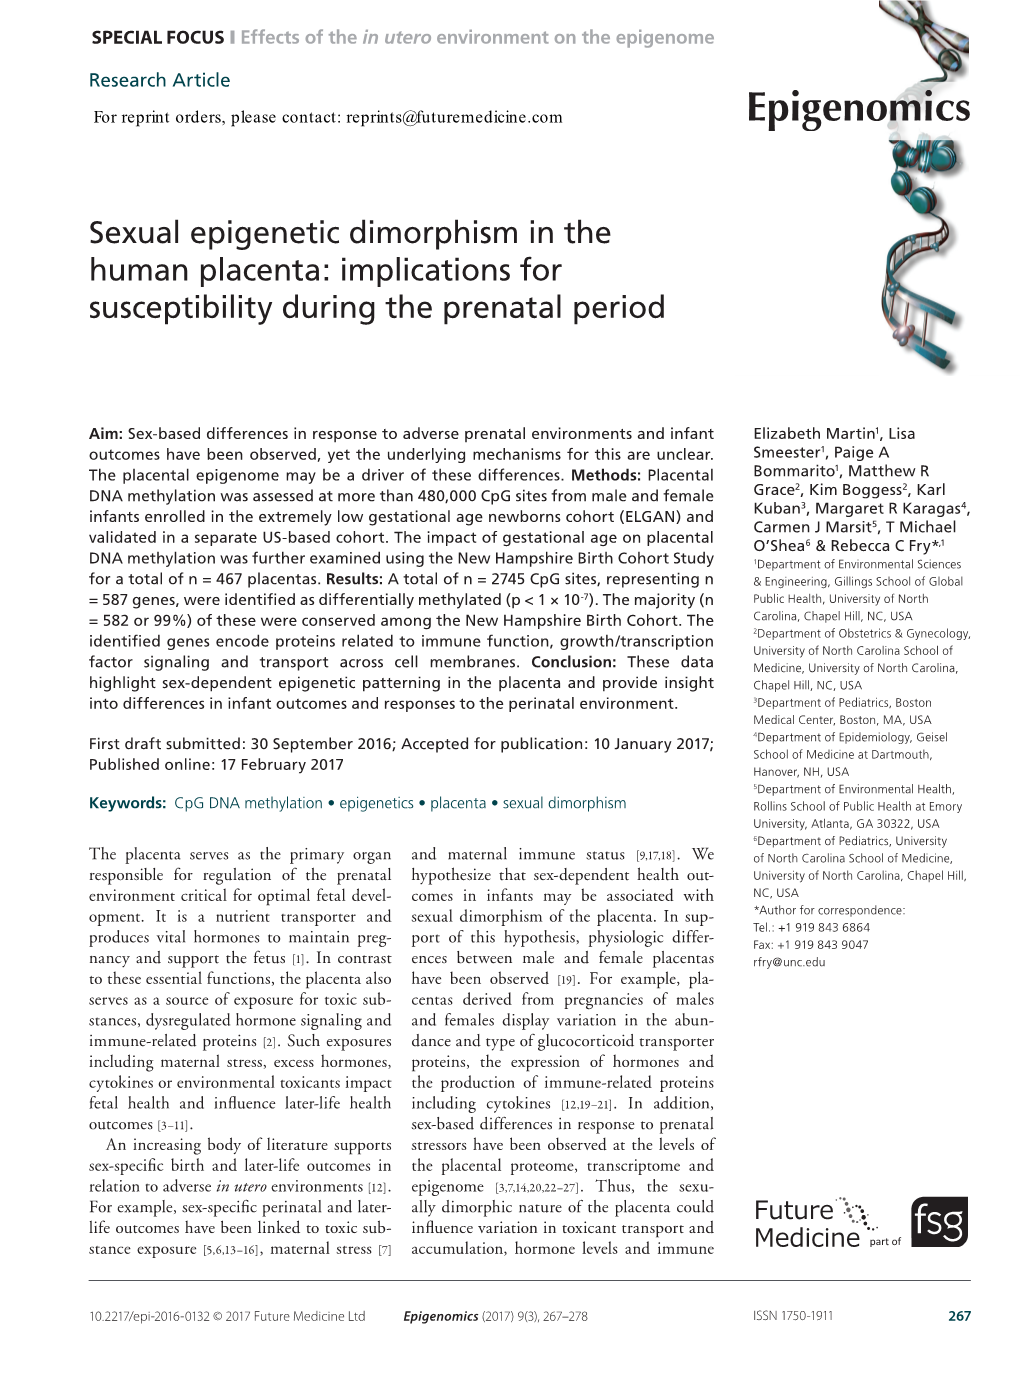 Sexual Epigenetic Dimorphism in the Human Placenta: Implications for Susceptibility During the Prenatal Period